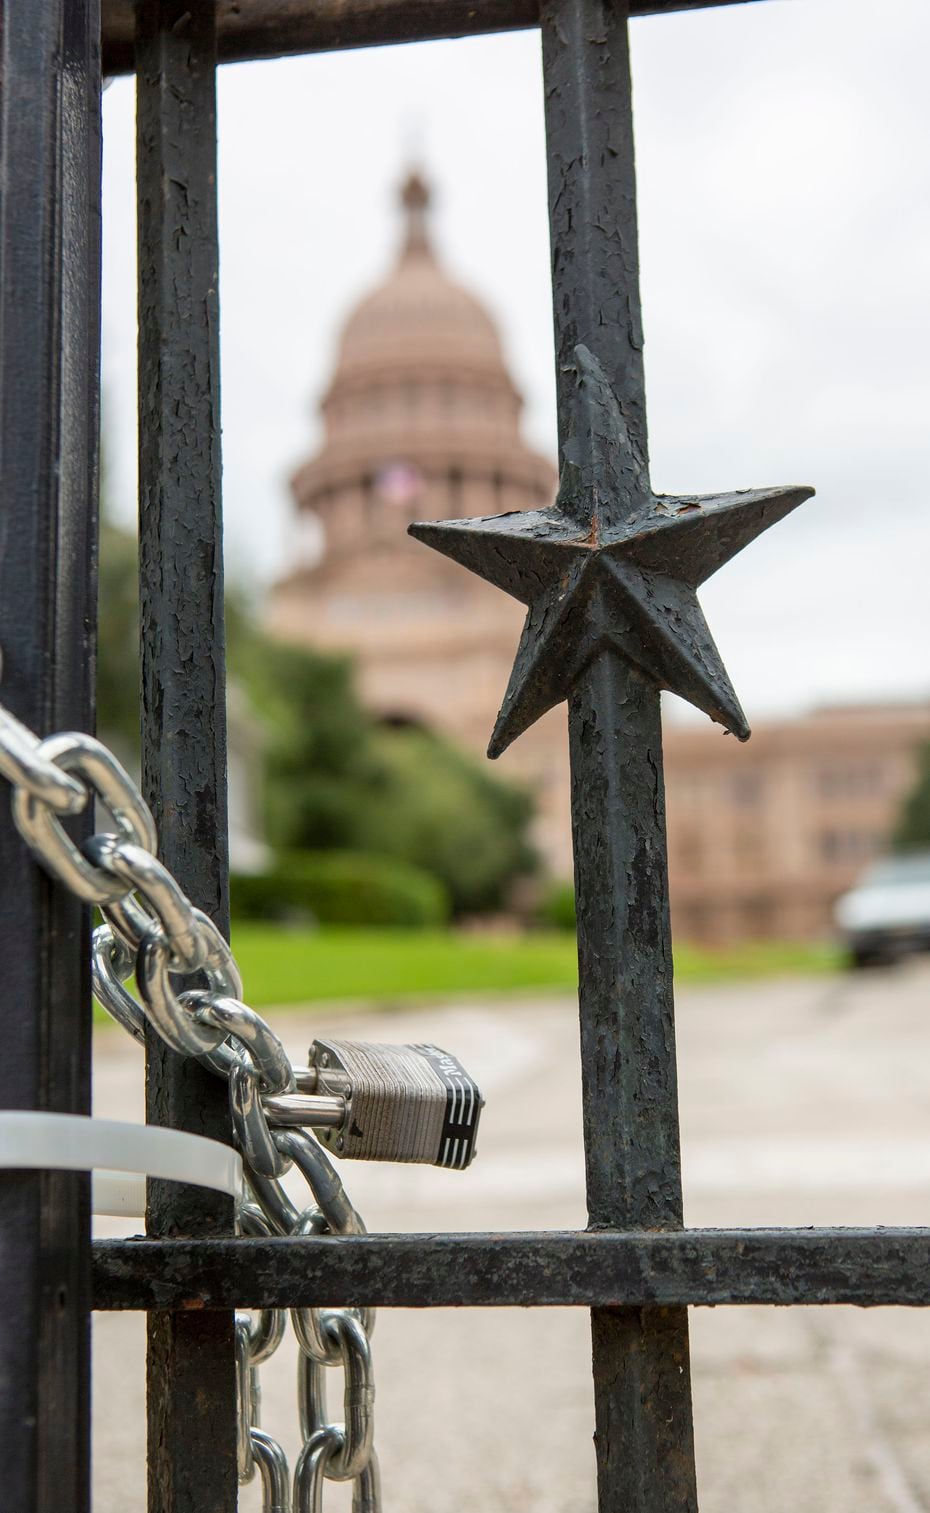 Chains and locks are seen throughout the fencing of the grounds of the Texas Capitol, such...